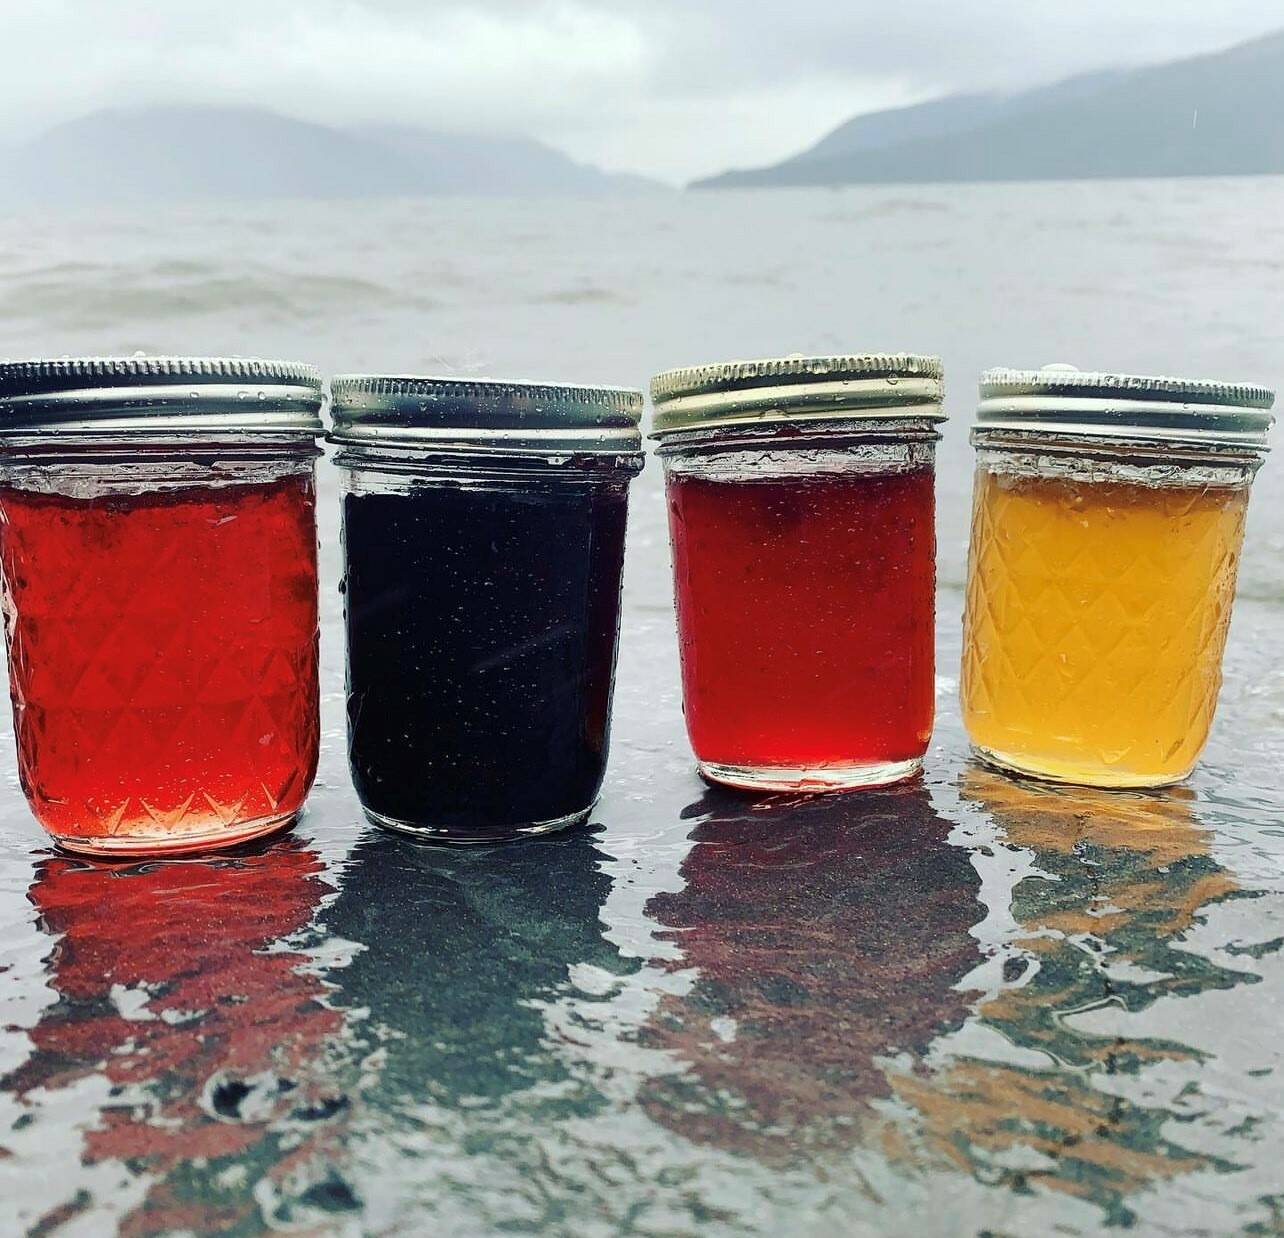 Jars of jam and jelly made by Vivian Faith Prescott and Nikka Mork sit on the beach in Wrangell. (Vivian Faith Prescott / For Capital City Weekly)